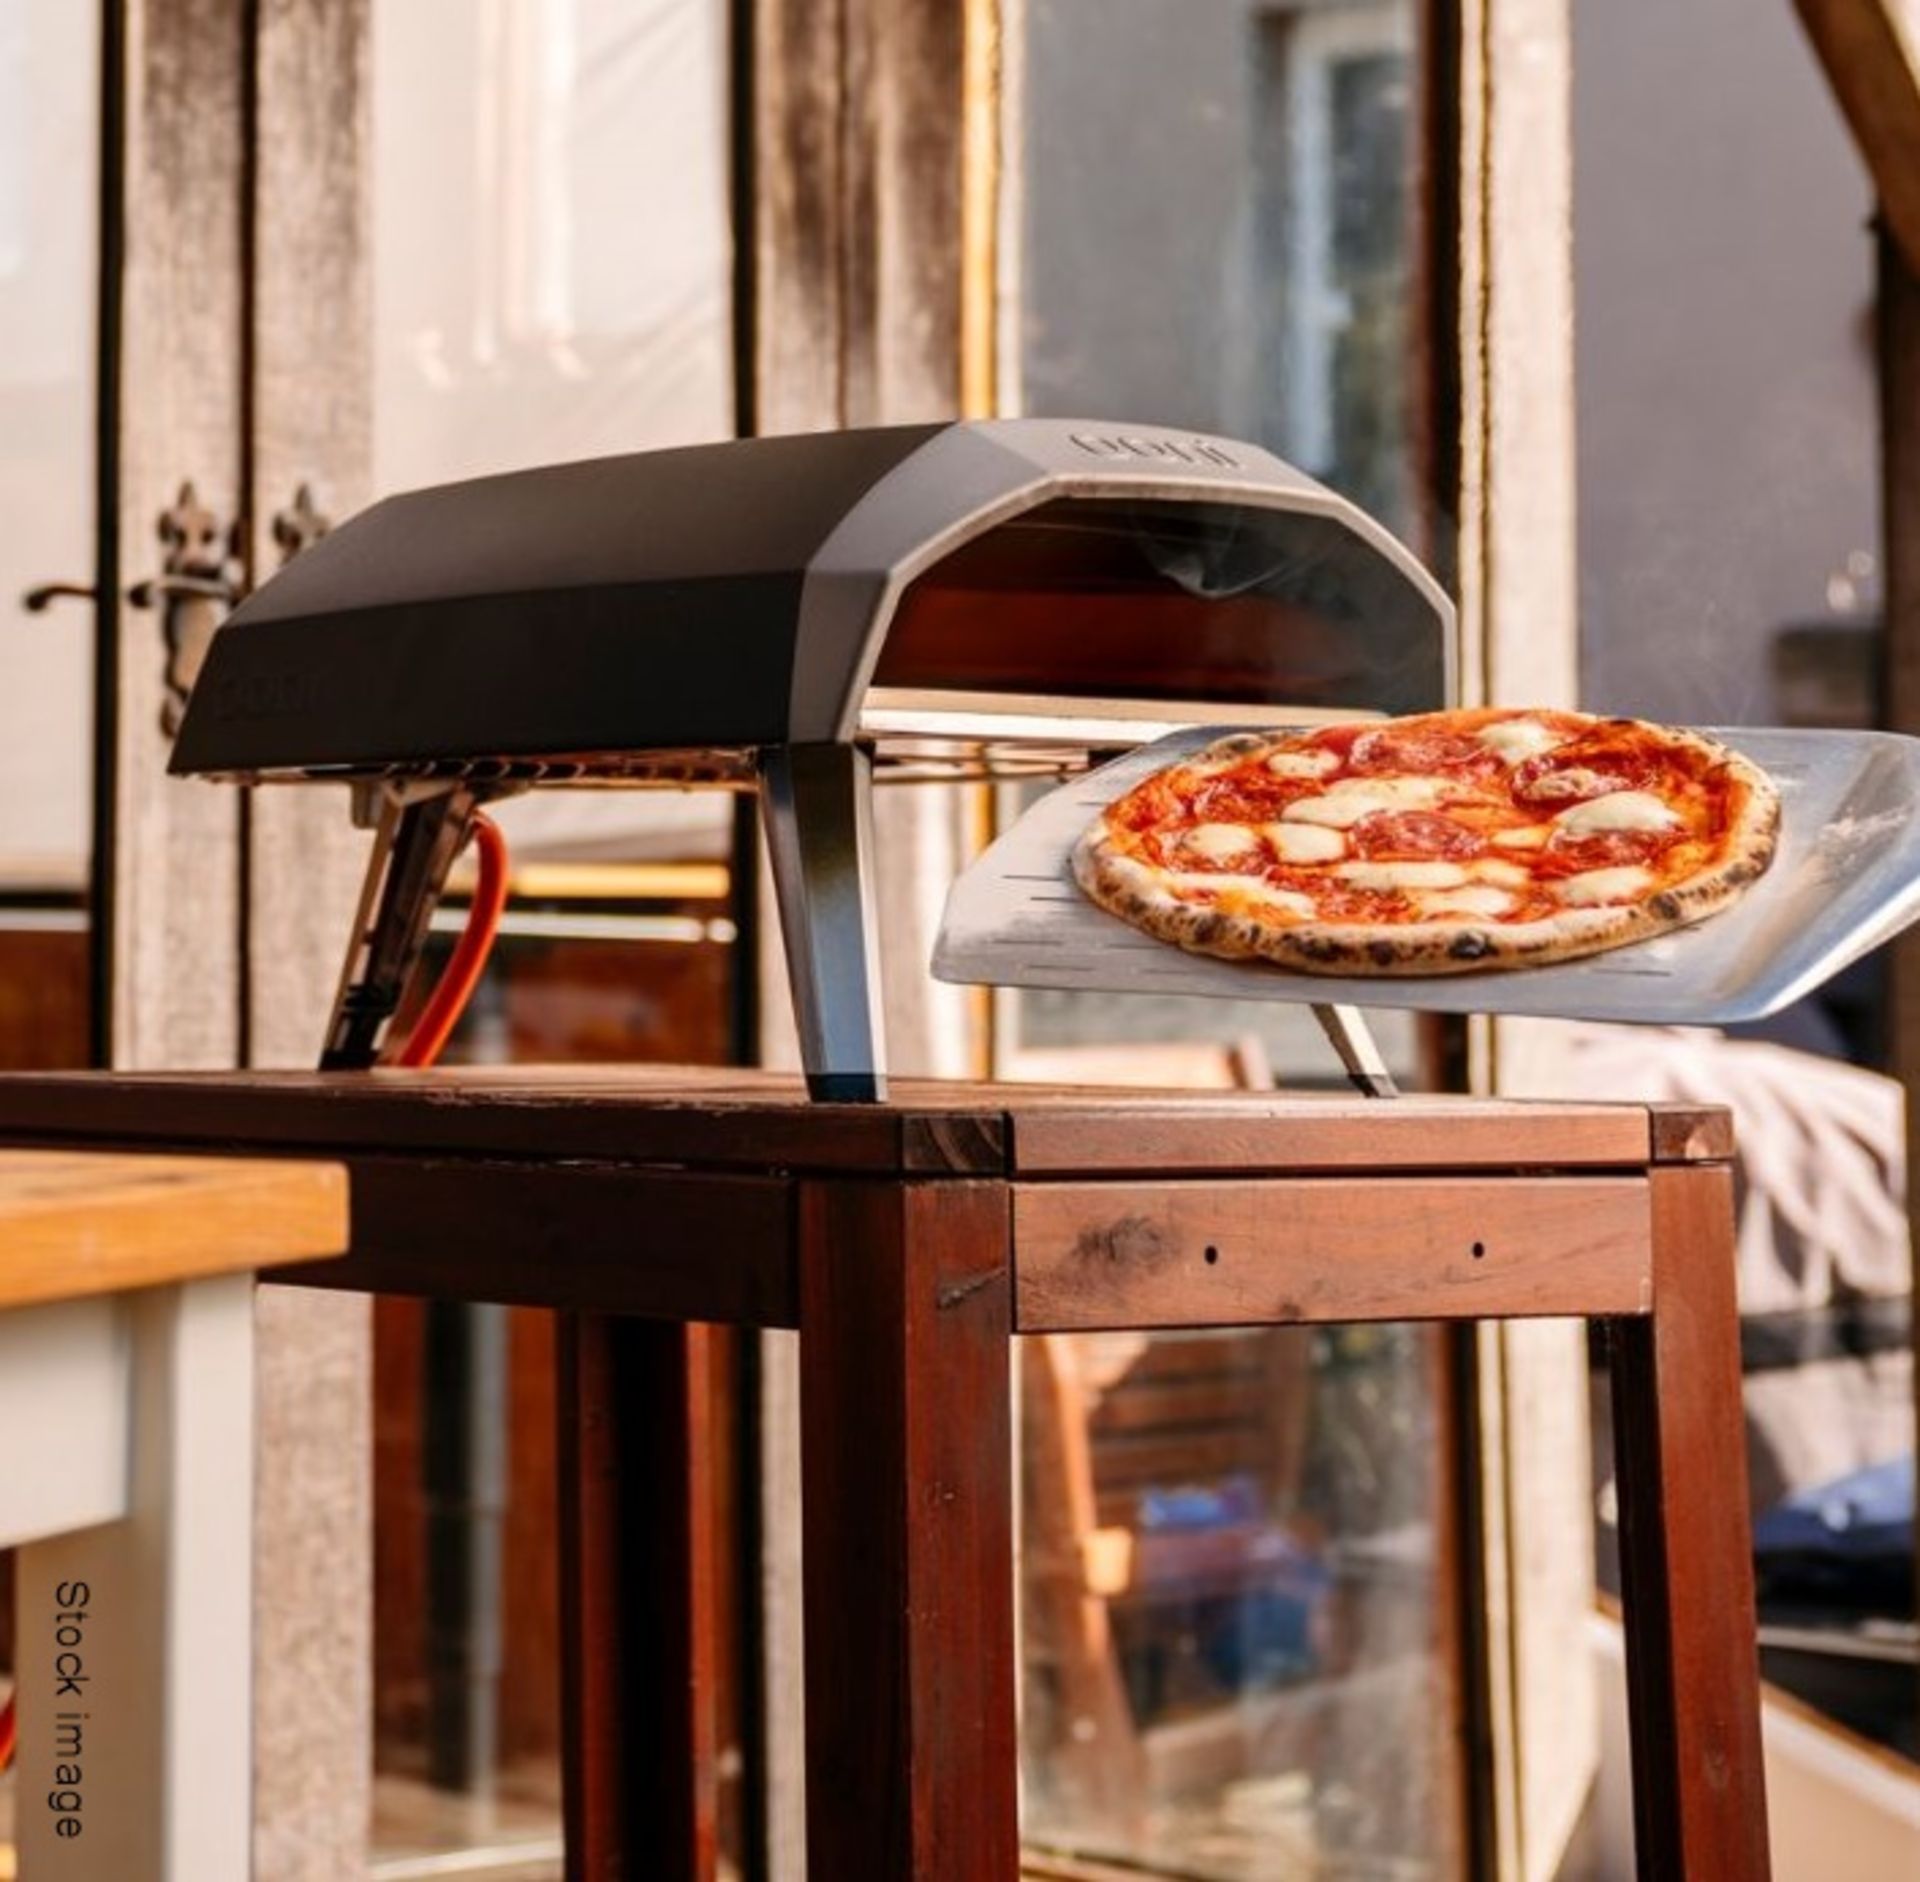 1 x OONI 'Koda' 12inch Pizza Oven Gas Fueled Cooks Stone Baked Pizzas In 60 Seconds